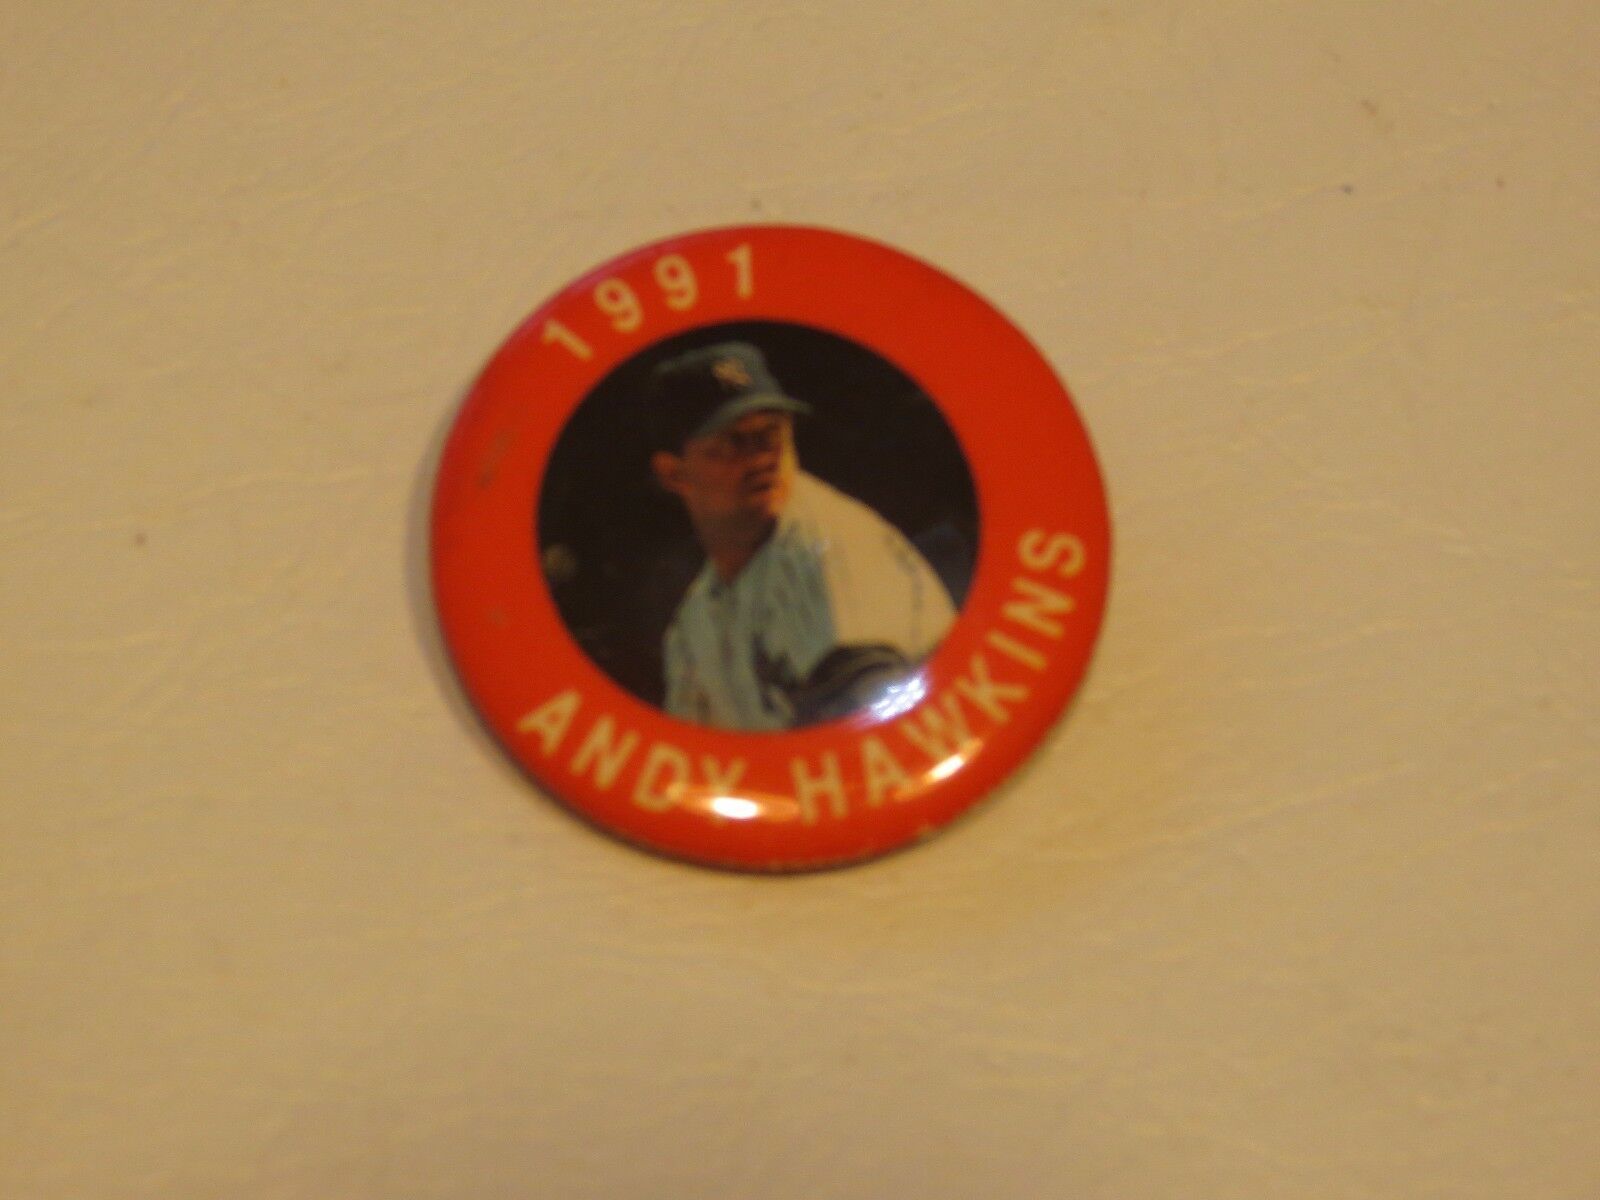 Primary image for RARE 1991 Baseball Pin Andy Hawkins New York Yankees button 1 1/2 in MLB MLBPA